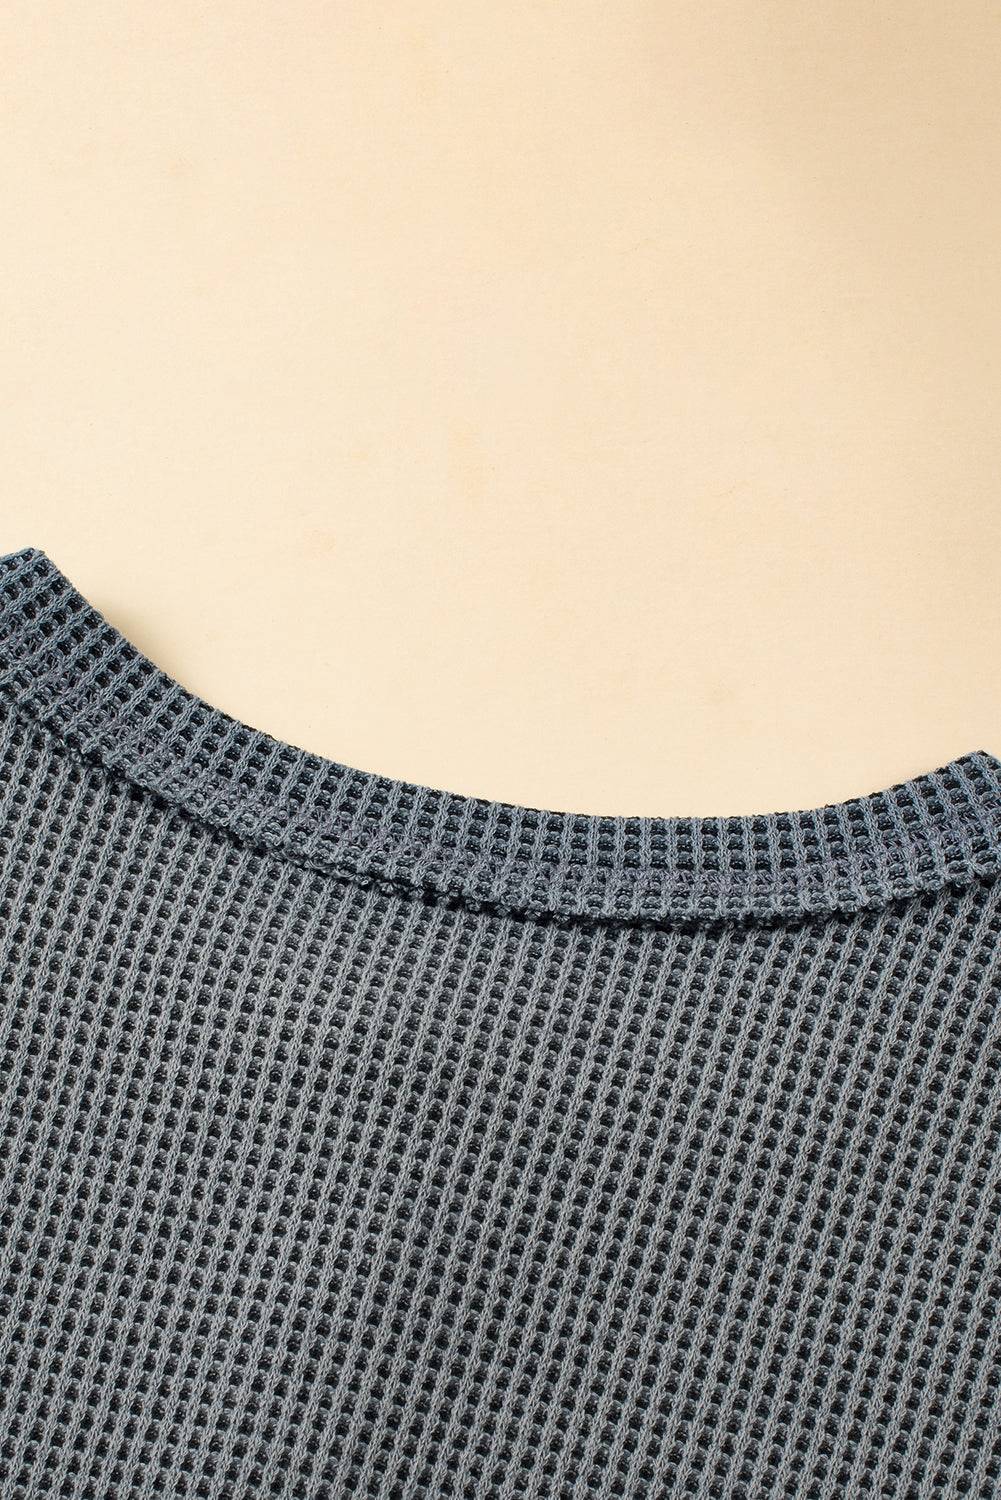 a close up of a sweater on a table